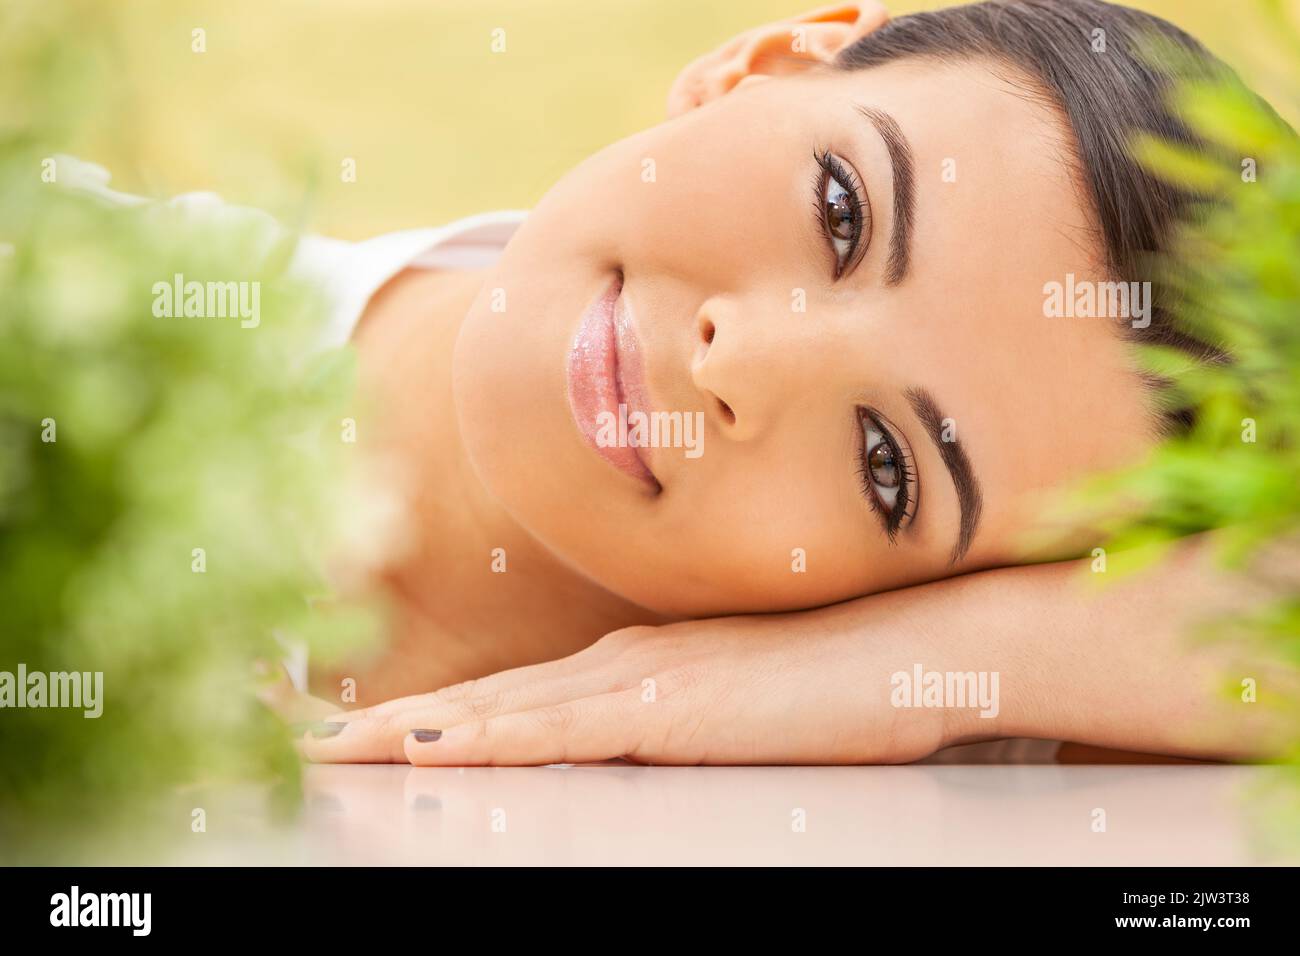 Health spa nature concept studio portrait of a beautiful young Hispanic Latina female young woman or girl resting on her hands smiling through natural Stock Photo